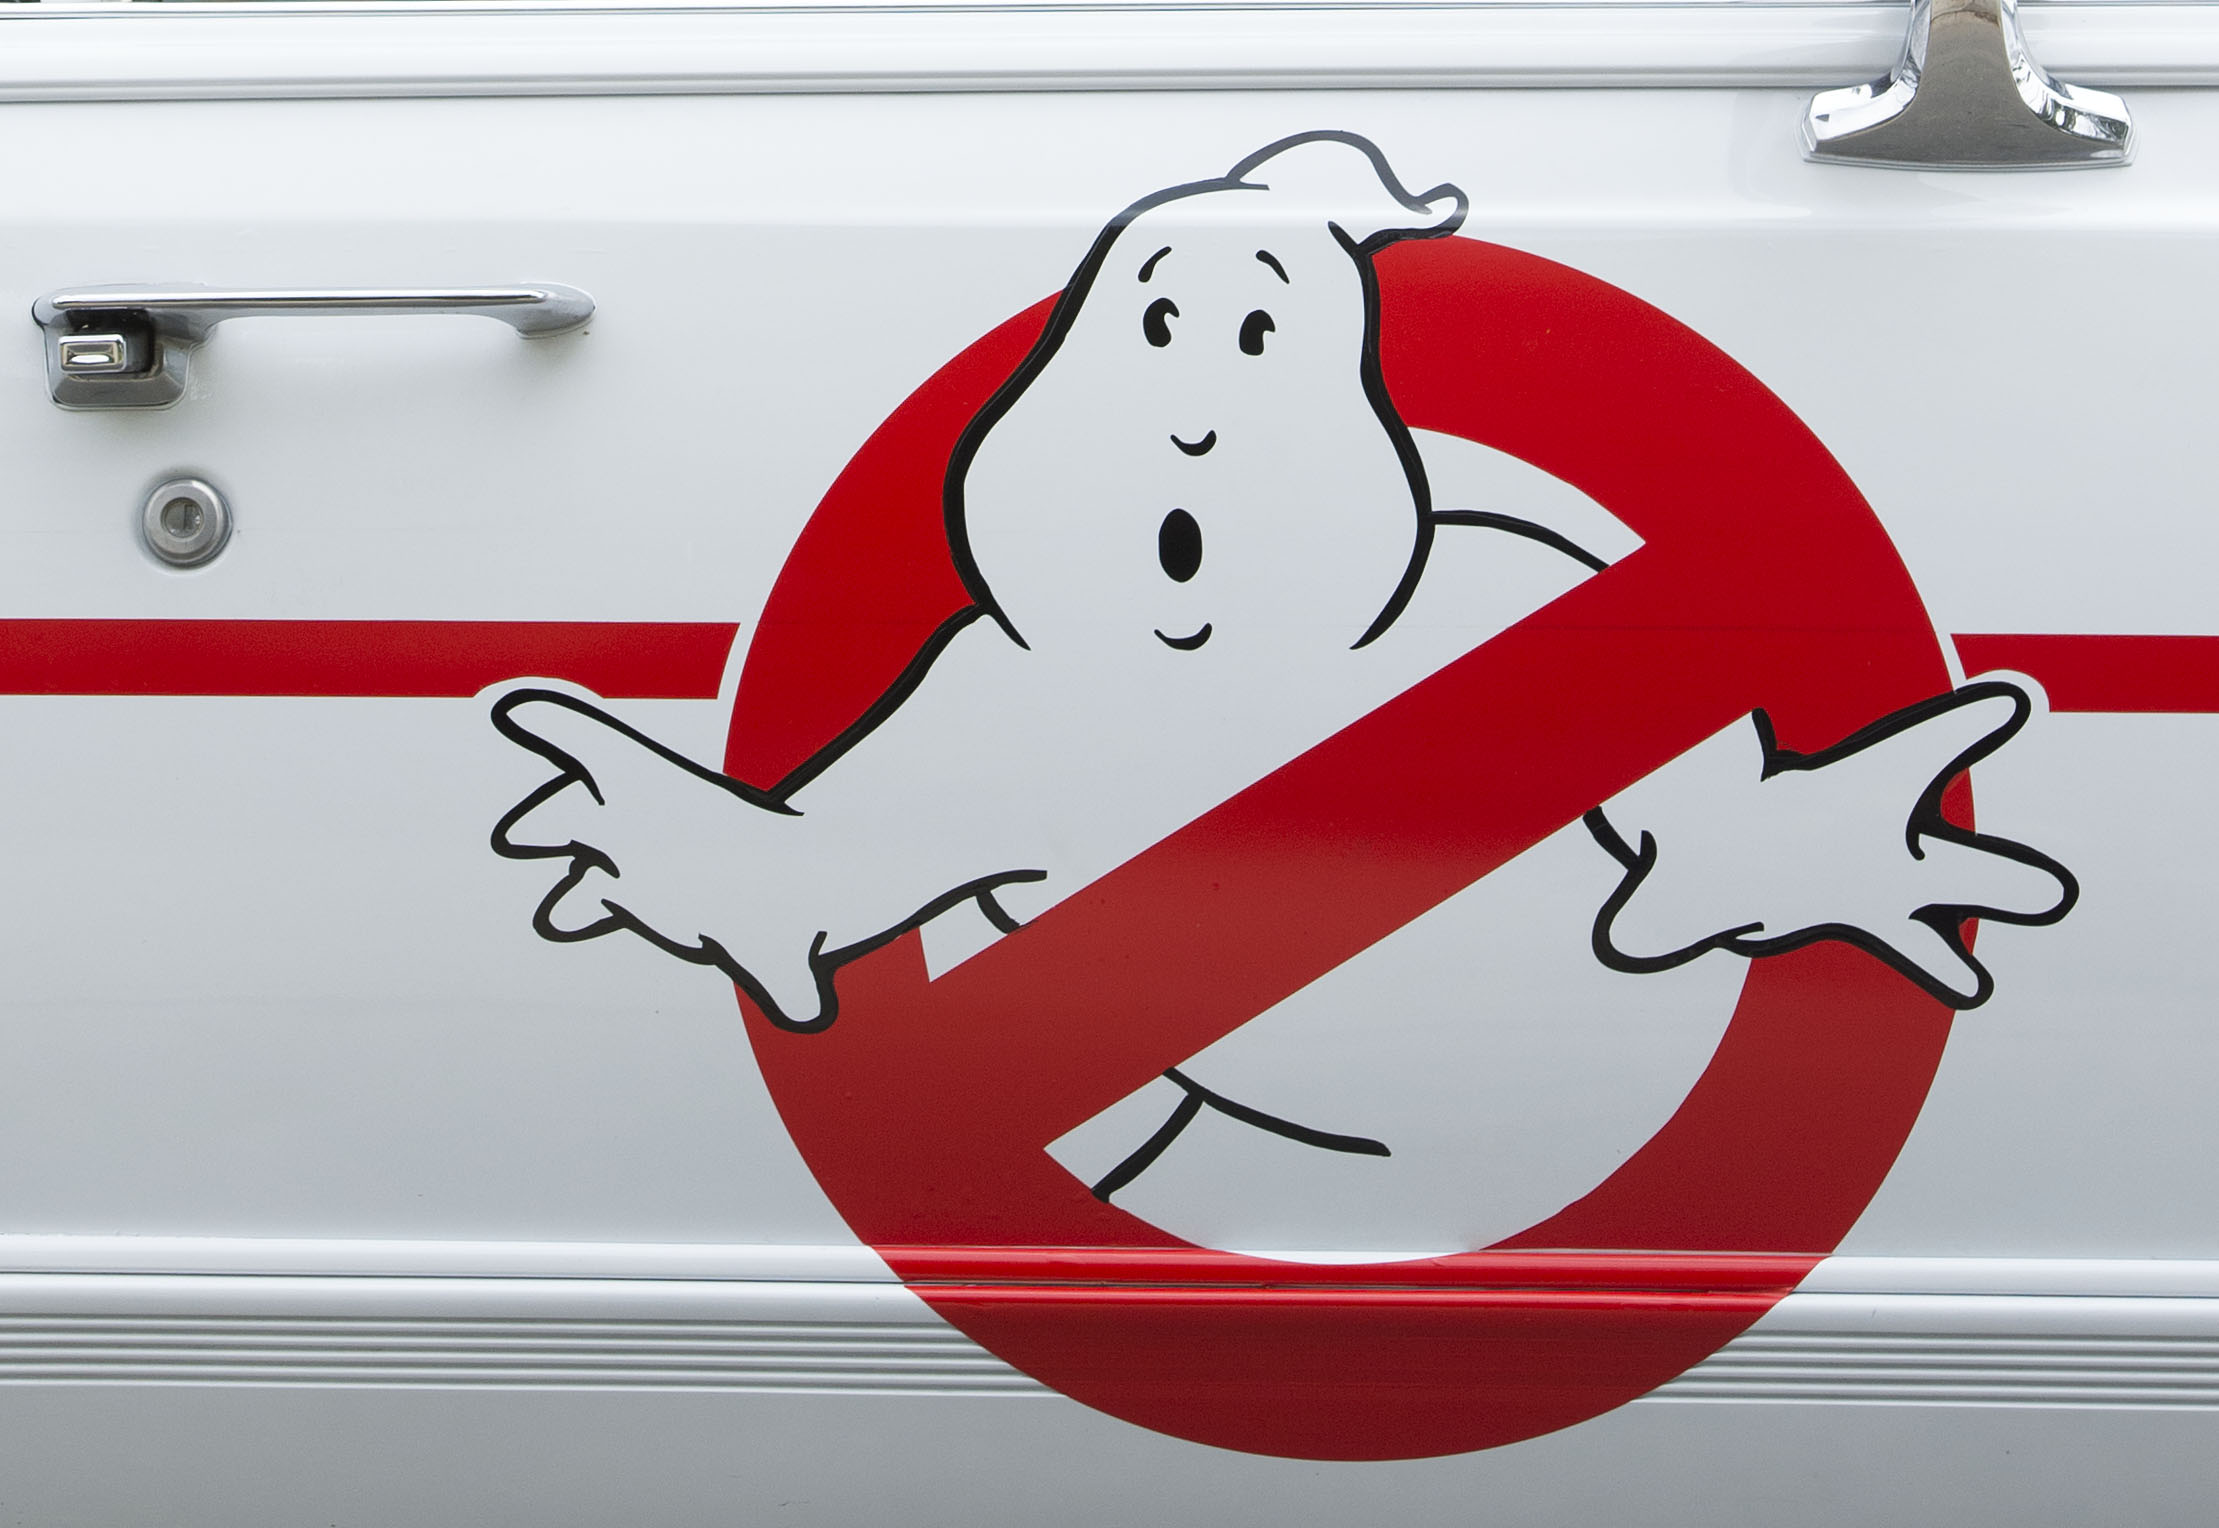 The 'Ghostbusters'  logo on the side of the Ecto-1